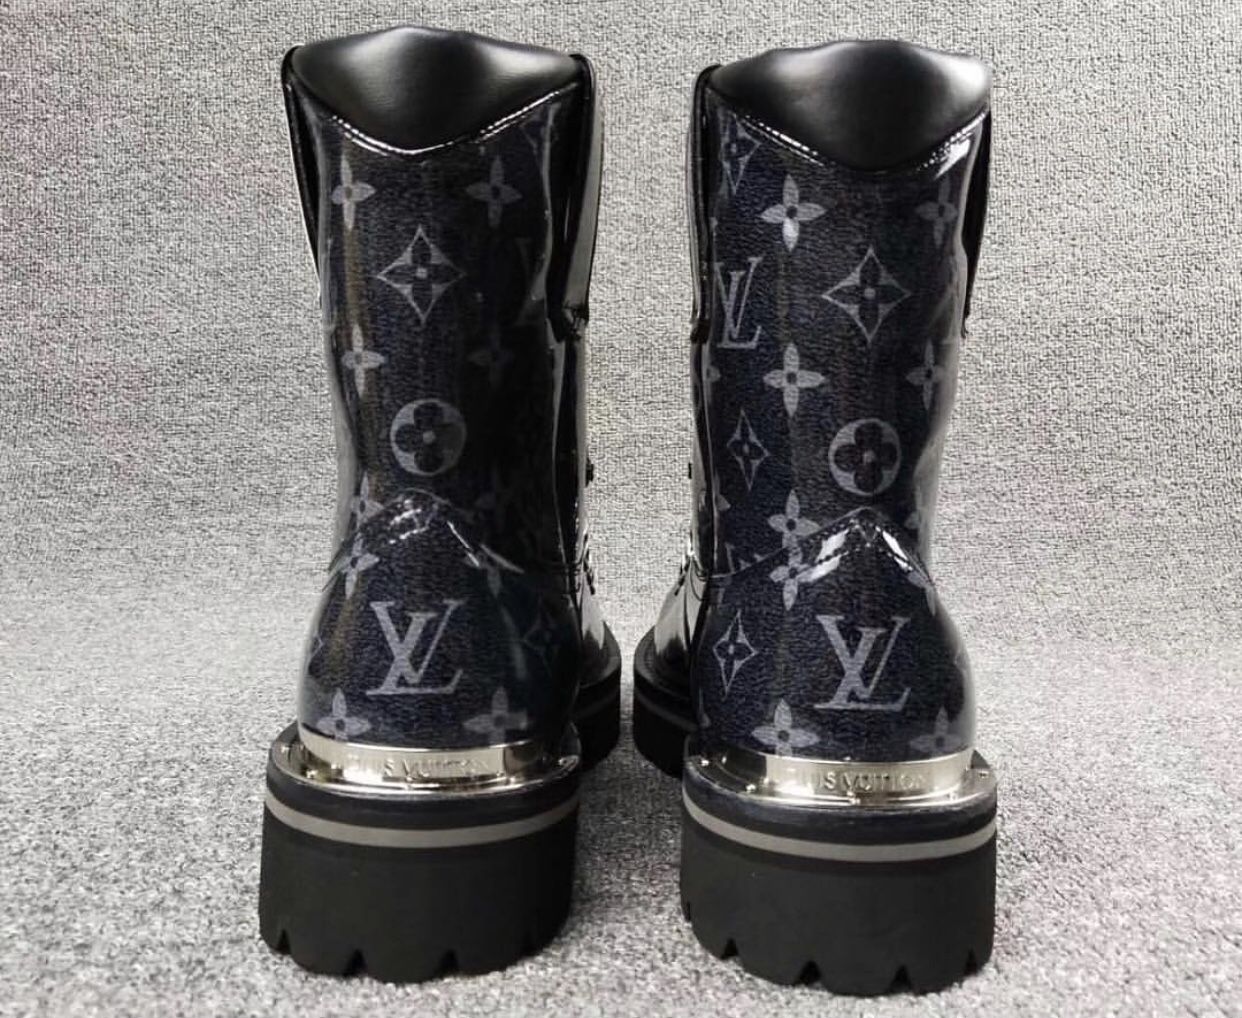 Louis Vuitton Boots for Sale in Town 'n' Country, FL - OfferUp